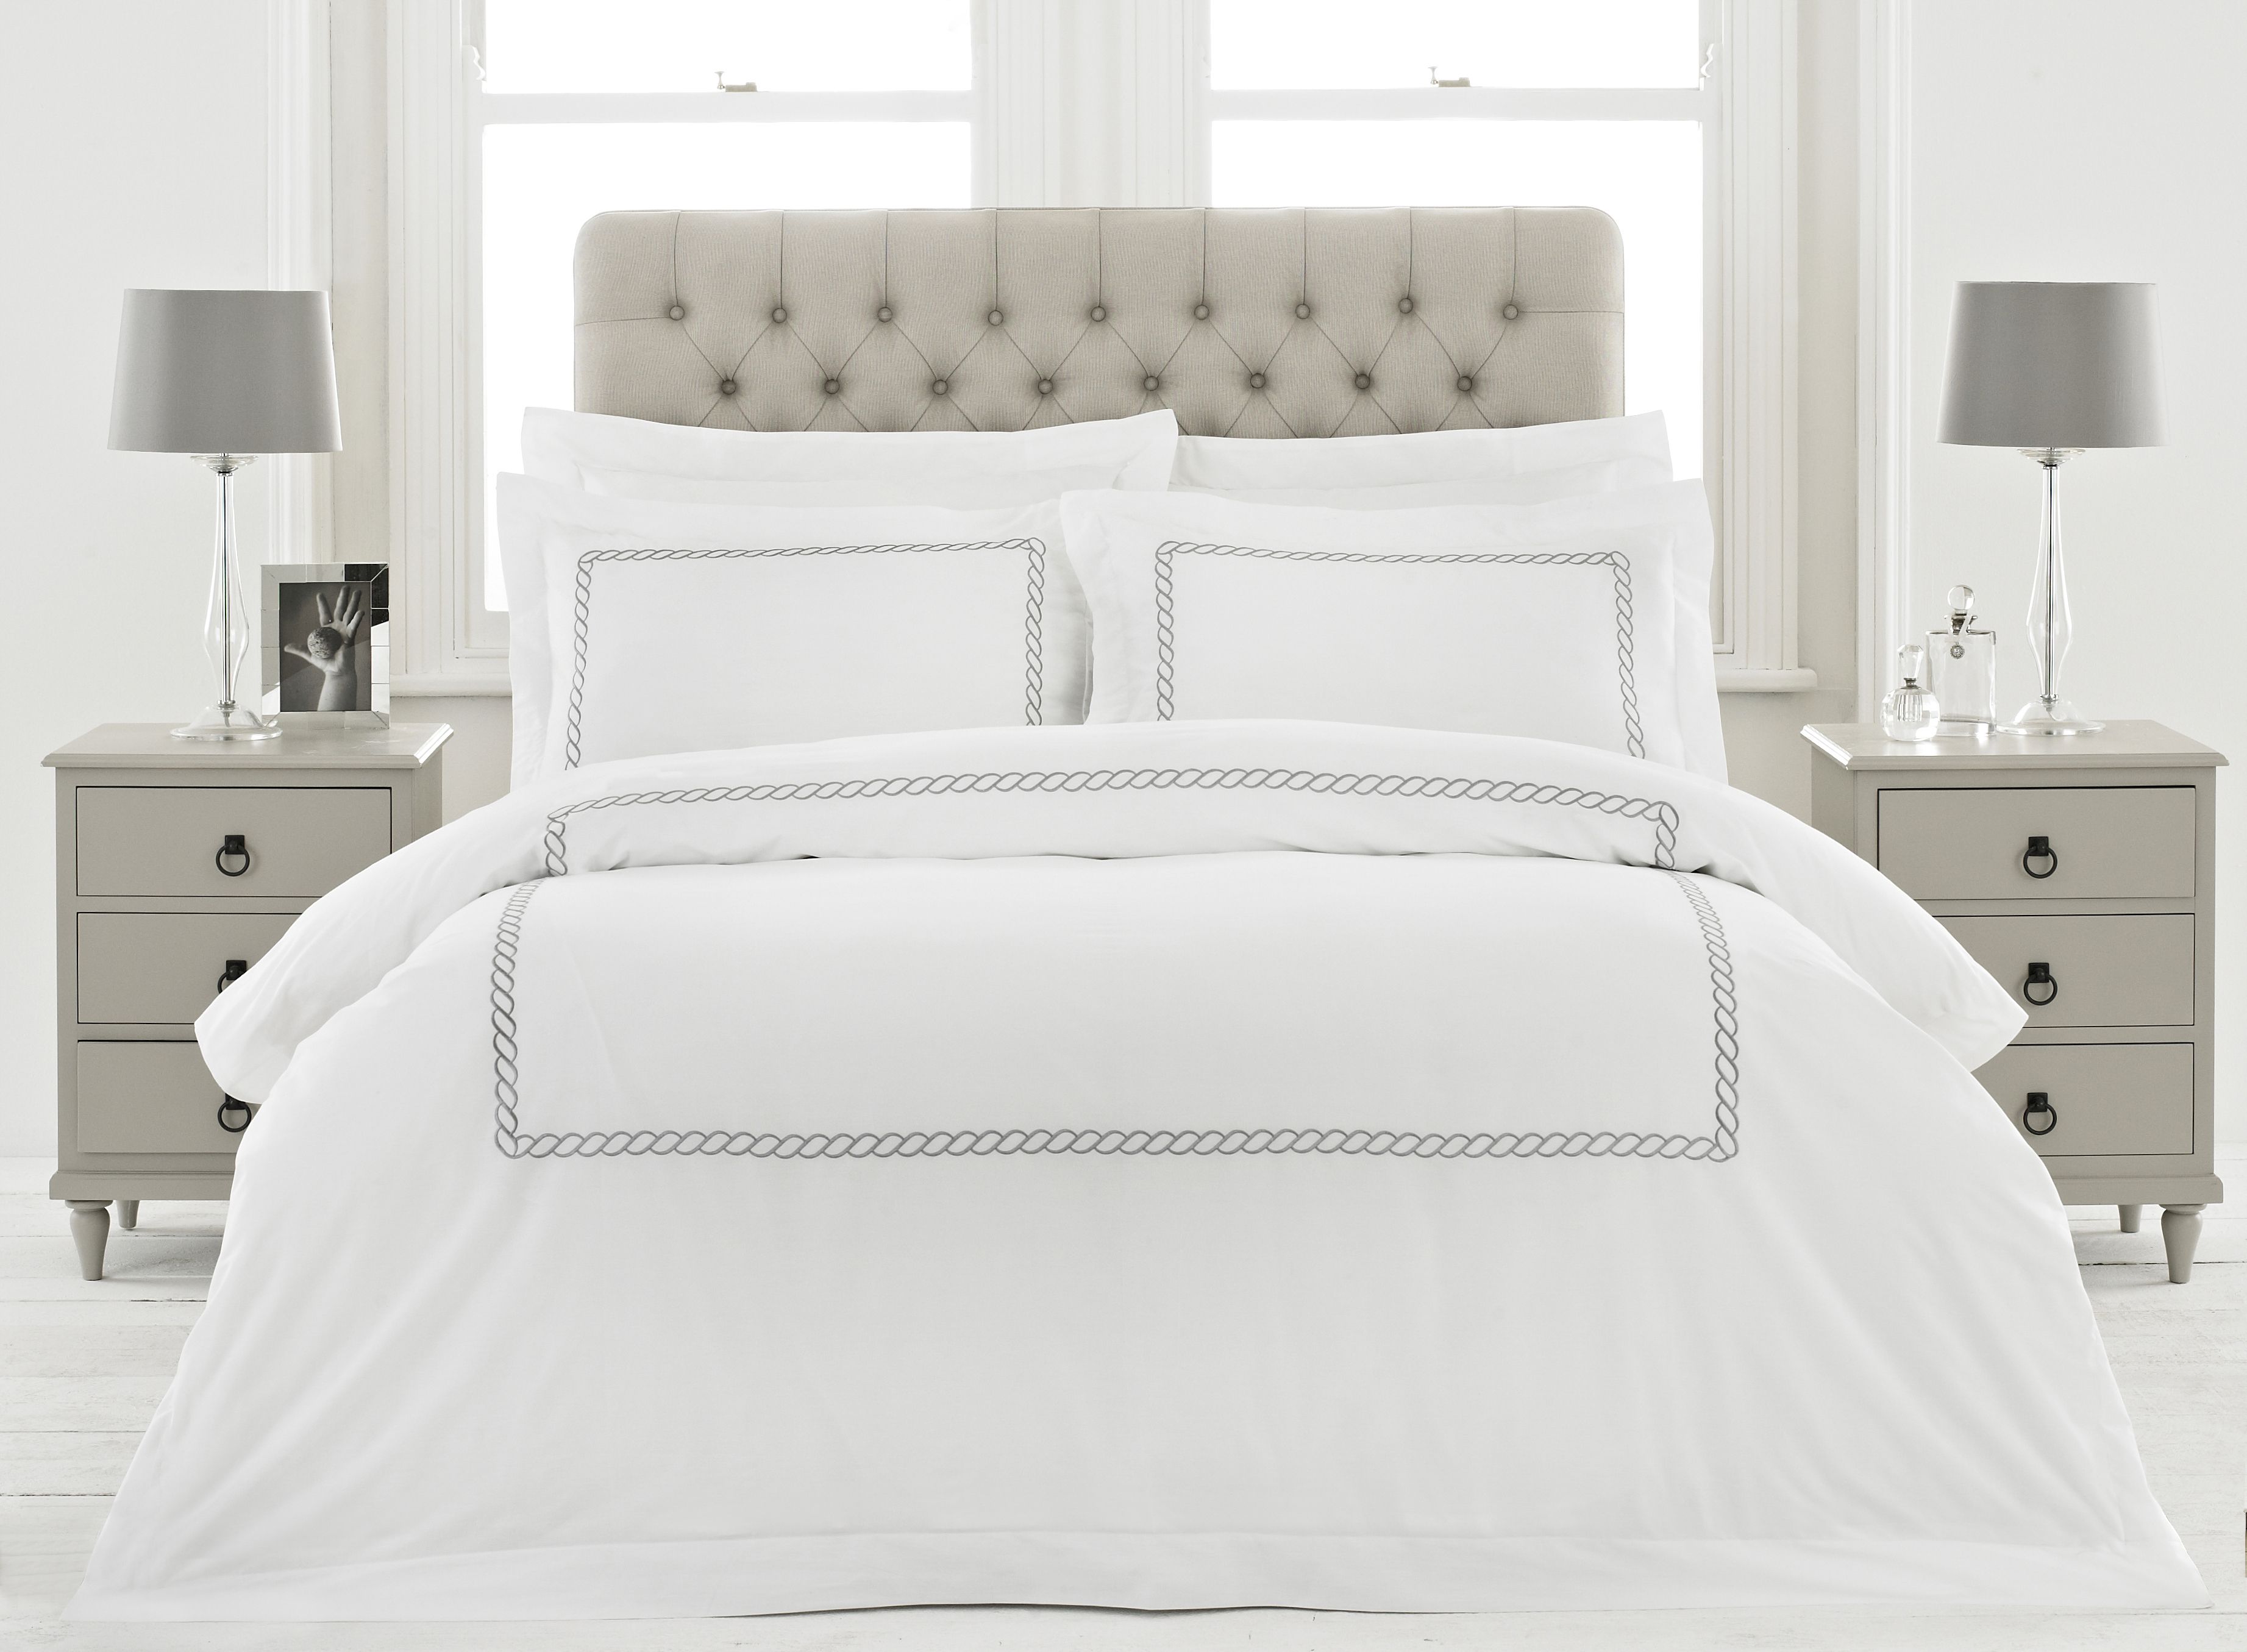 Created from the very finest pure cotton, the Paoletti Cleopatra duvet sets are unashamedly luxurious. Designed for some of the most luxurious boutique 5-star hotels, give your bed a treat and prepare for the best nights sleep of your life. Featuring premium rope embroidery and a luxurious oxford border it's an ideal match for most bedrooms. This duvet set includes a hotel-quality duvet cover and one fully matching pillowcase. The Cleopatra duvet set is easy to care for as it is fully machine washable at 40 degrees and is iron appropriate.